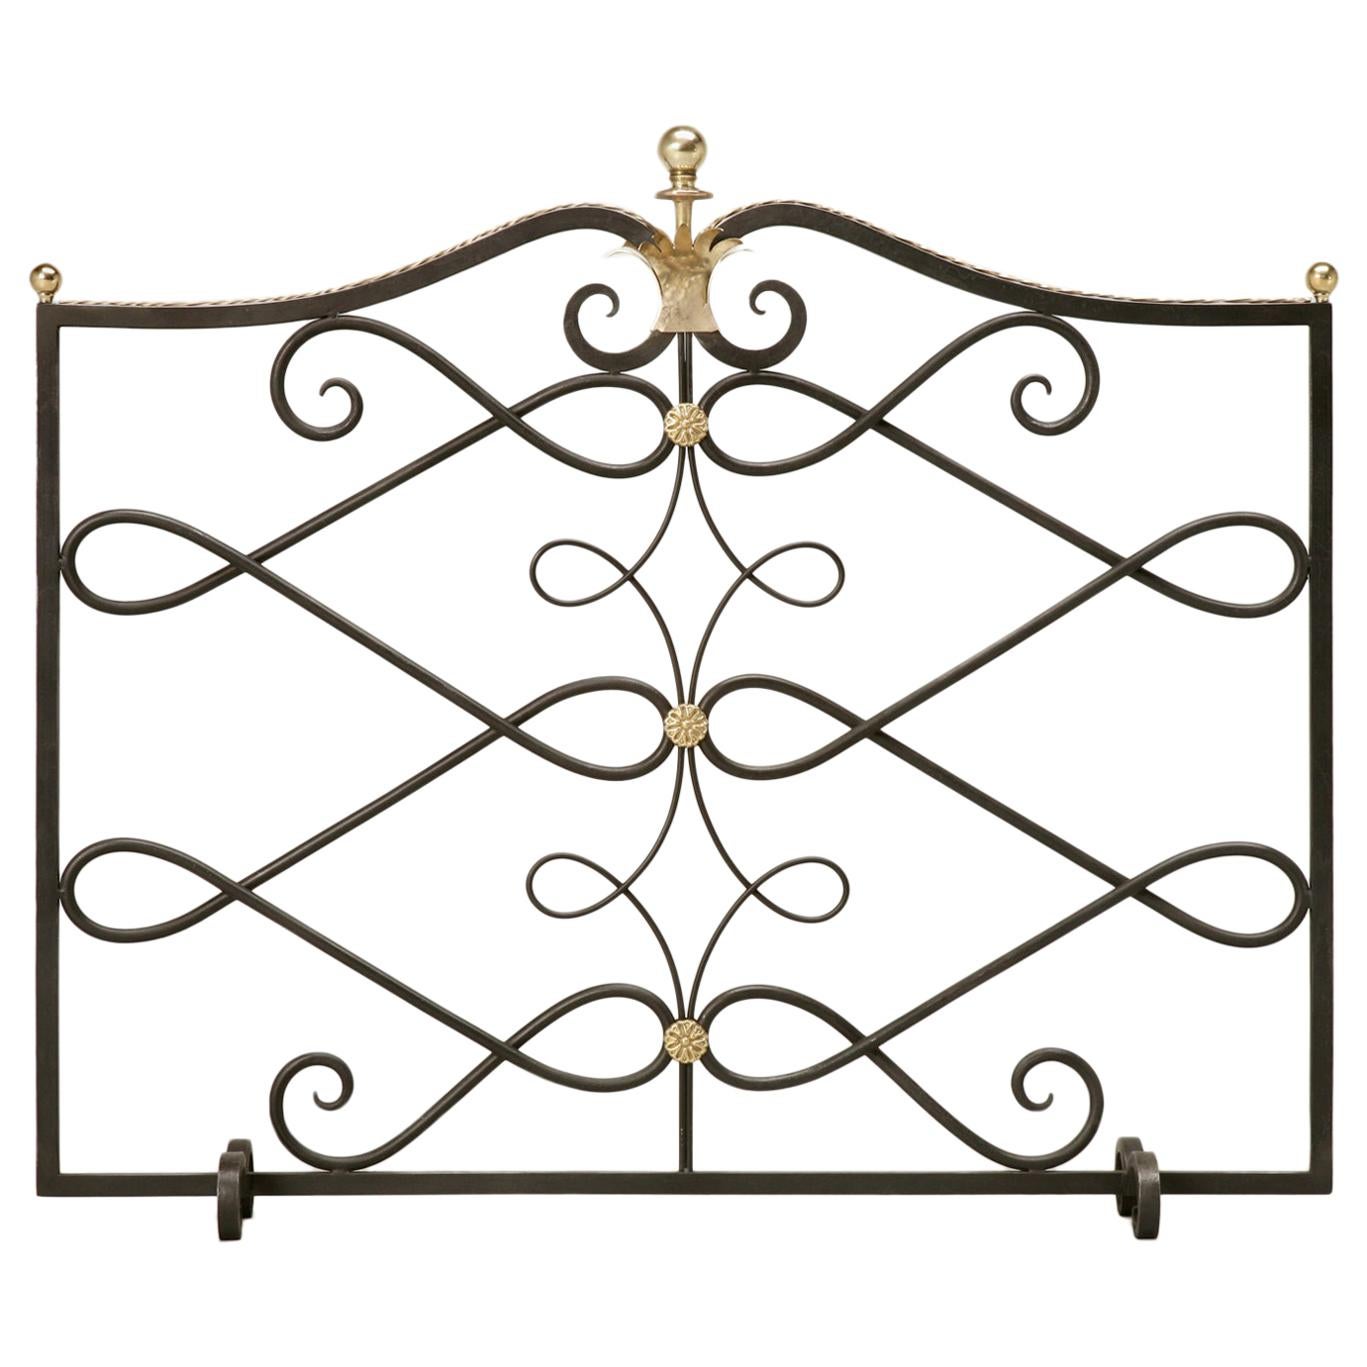 Custom Handmade Steel and Brass Fireplace Screen in any Dimension or Finish For Sale